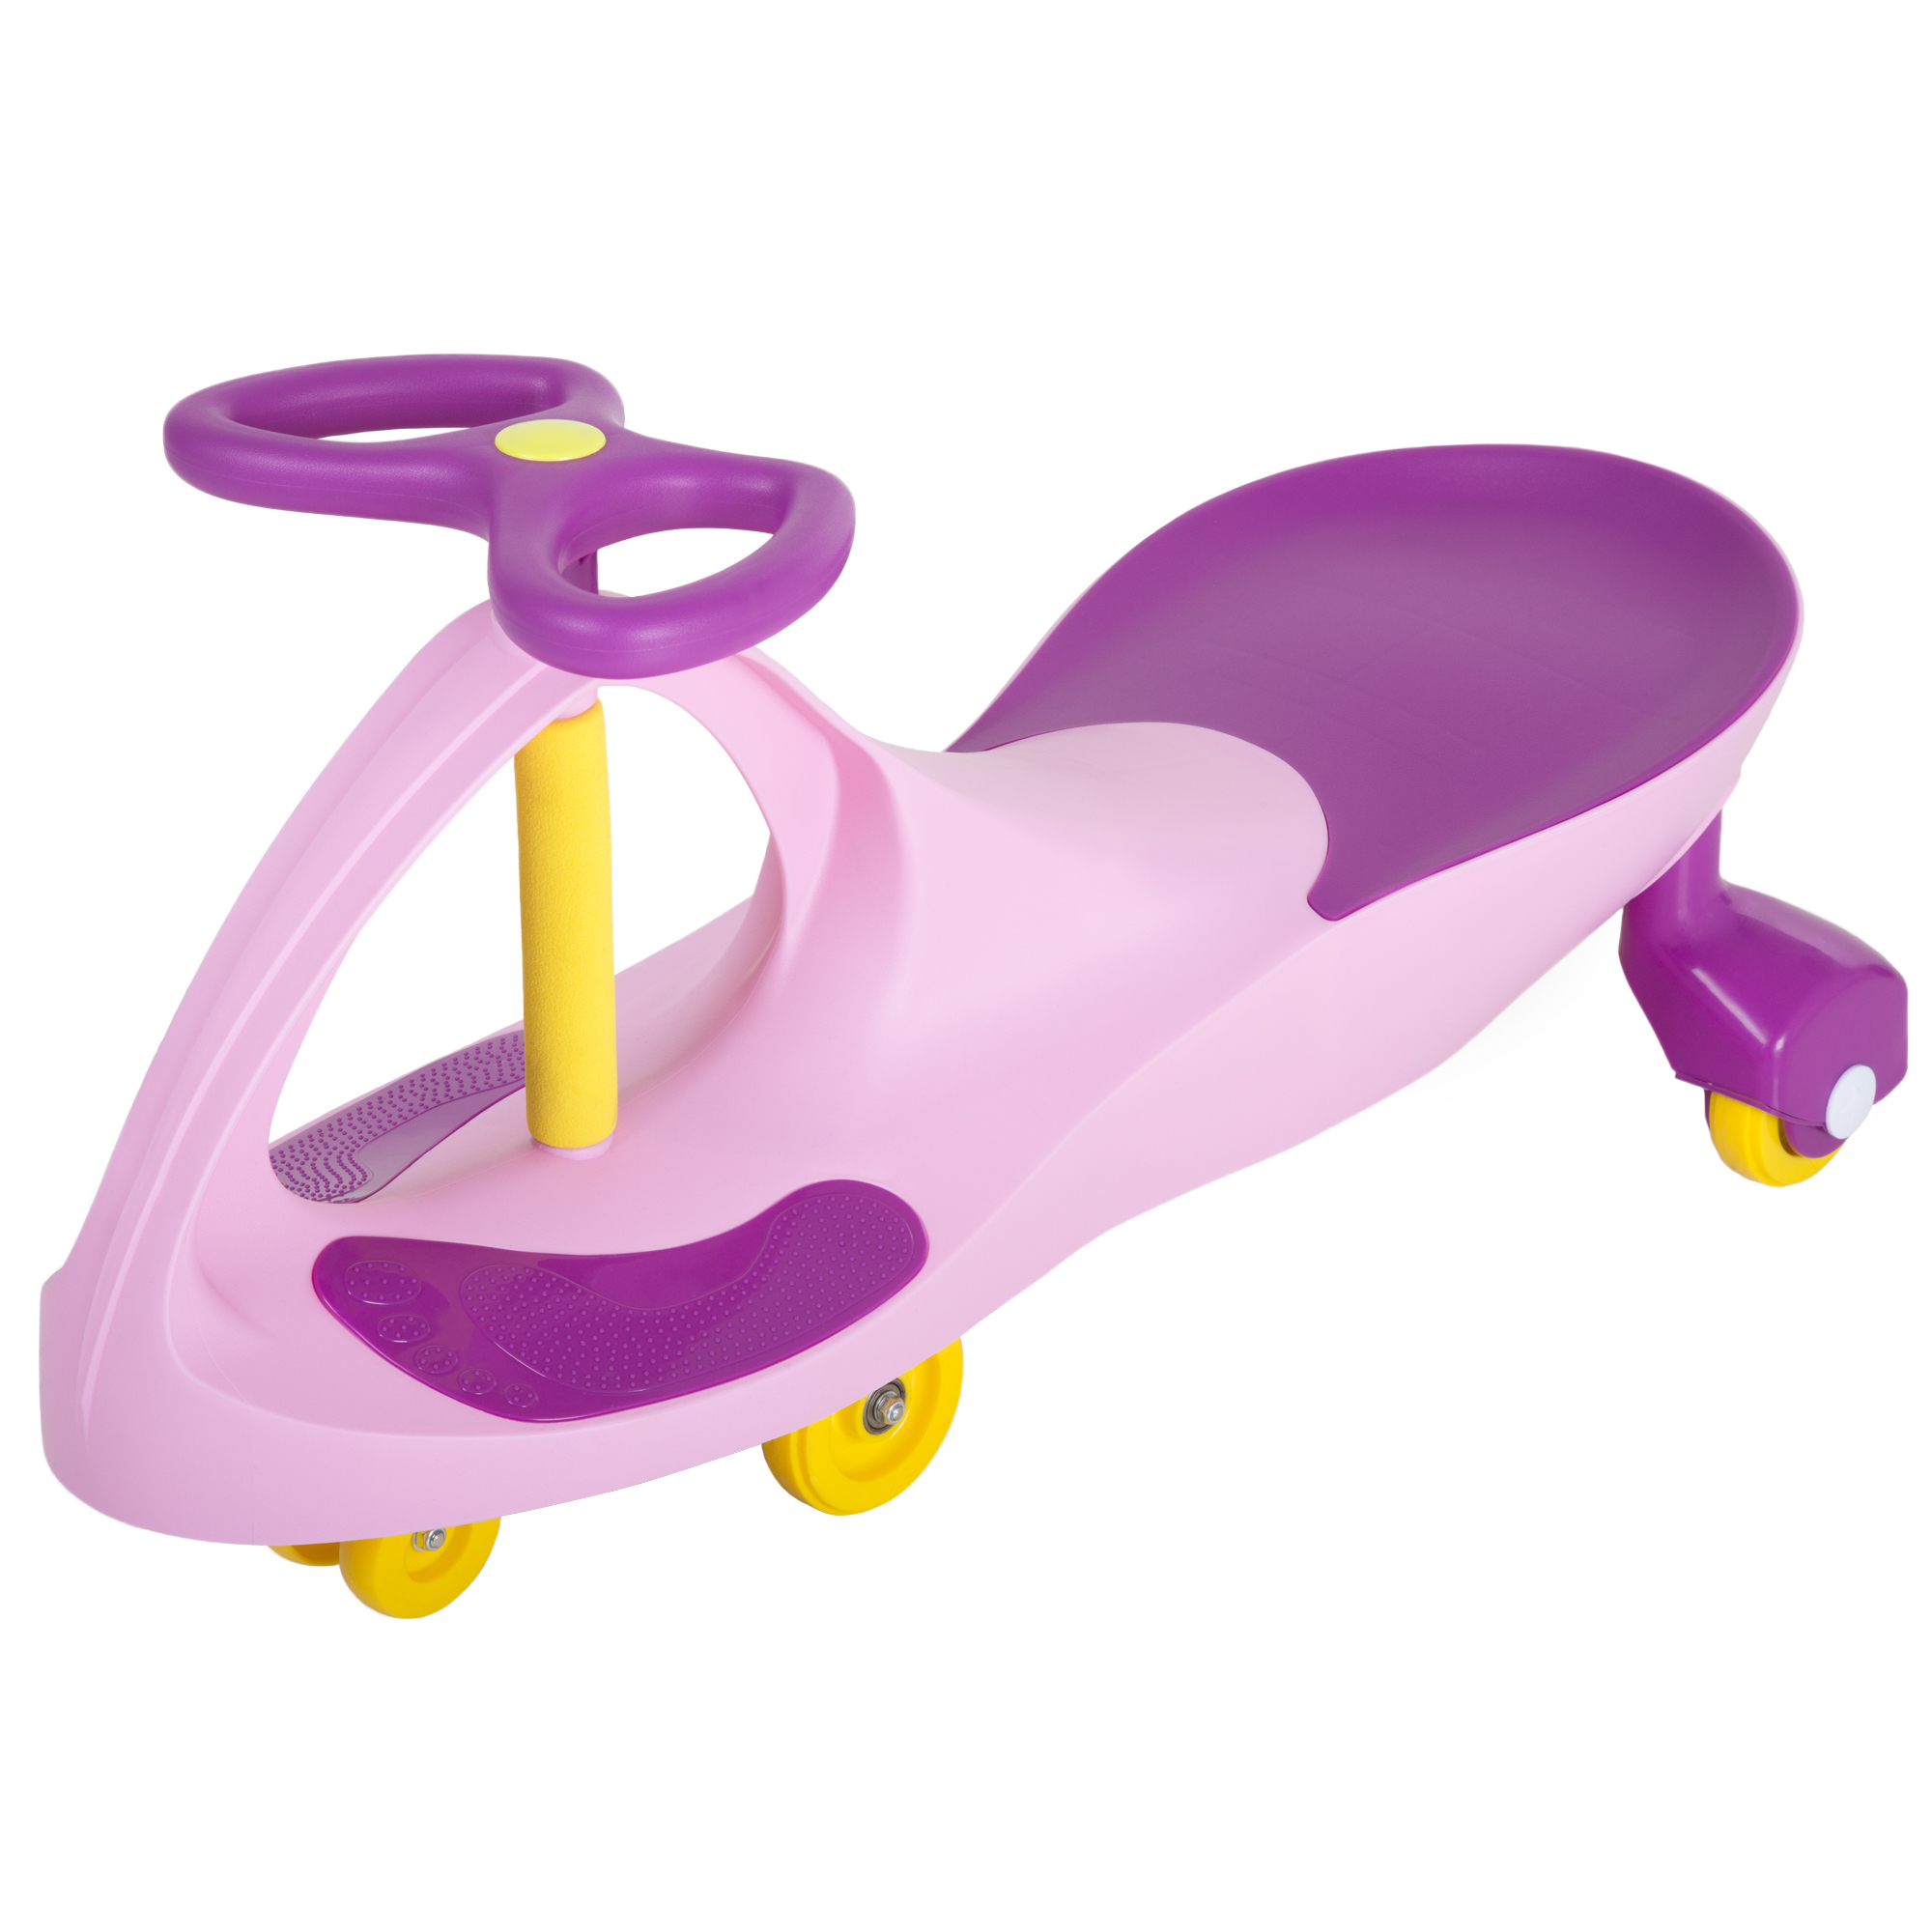 Colorful Ride On Toy Wiggling Ride On Toy For Girls Boys 2-6 Yrs Old Roller Coaster Twisting Car - Pink-Purple